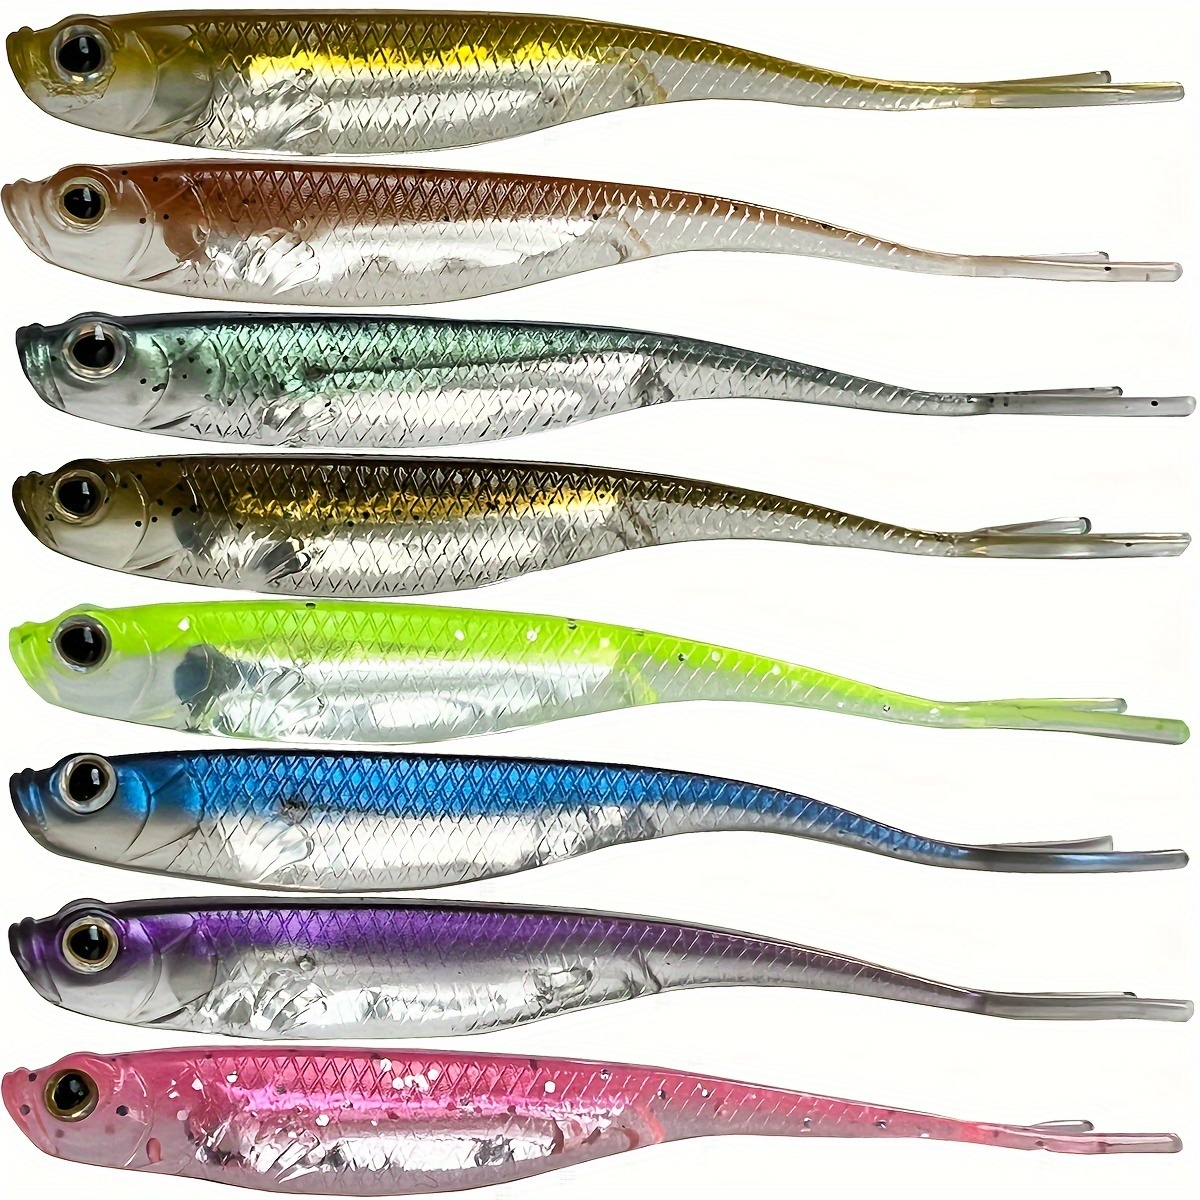 6Pcs Fishing Lures Floating Weedless Frog Baits for Bass Freshwater  Saltwater Fishing with Double Sharp Hooks Random